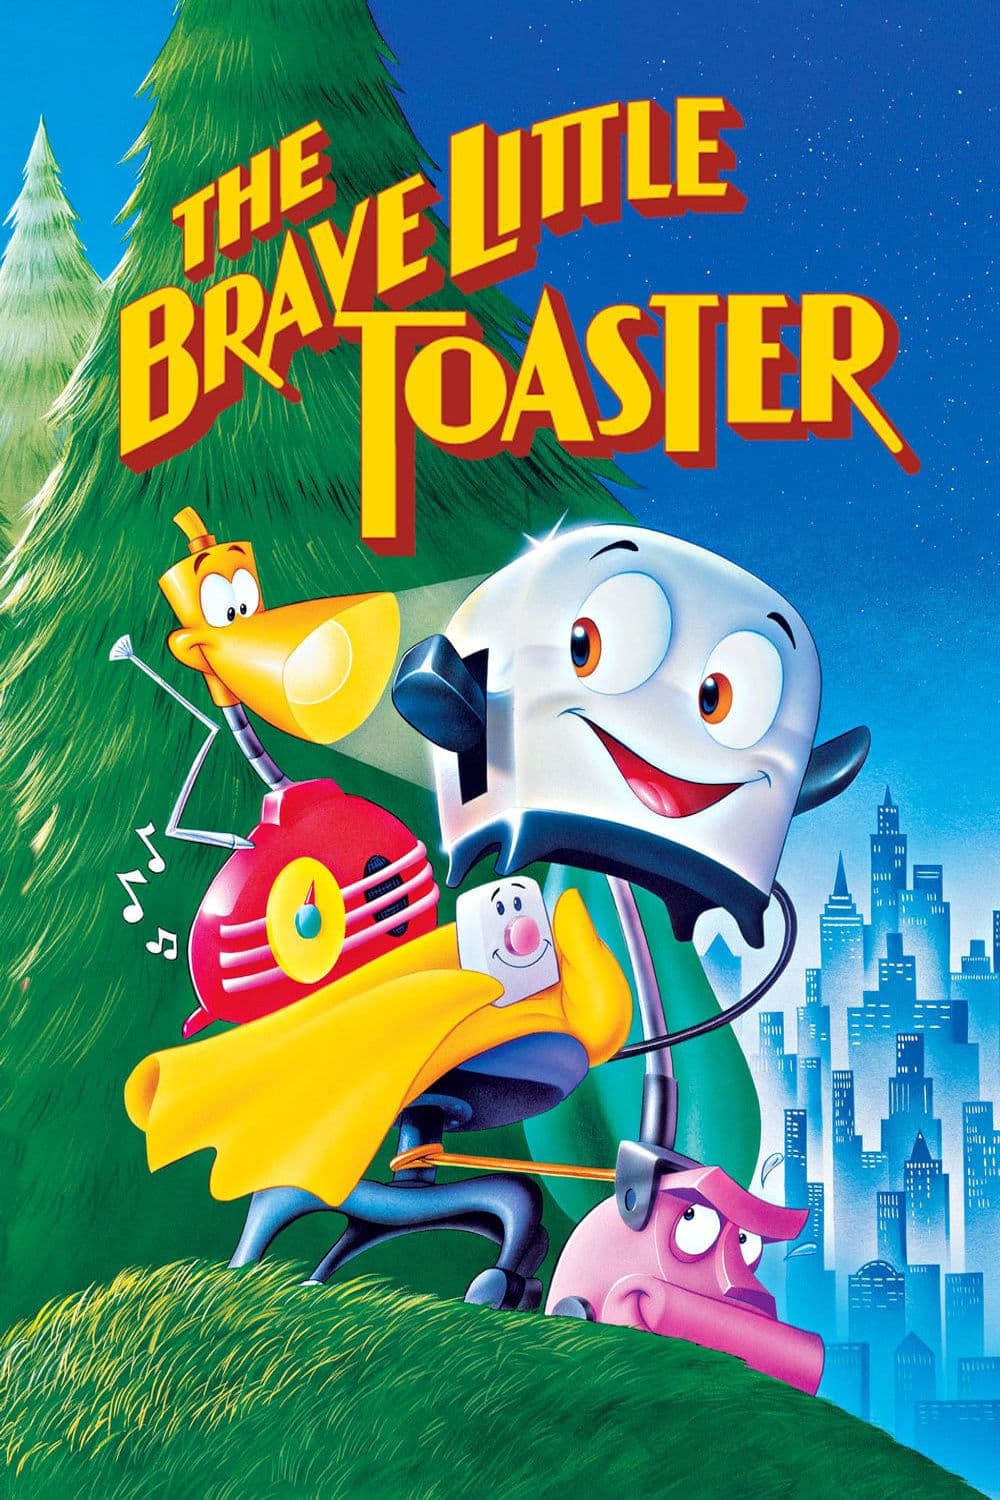 An official poster for The Brave Little Toaster